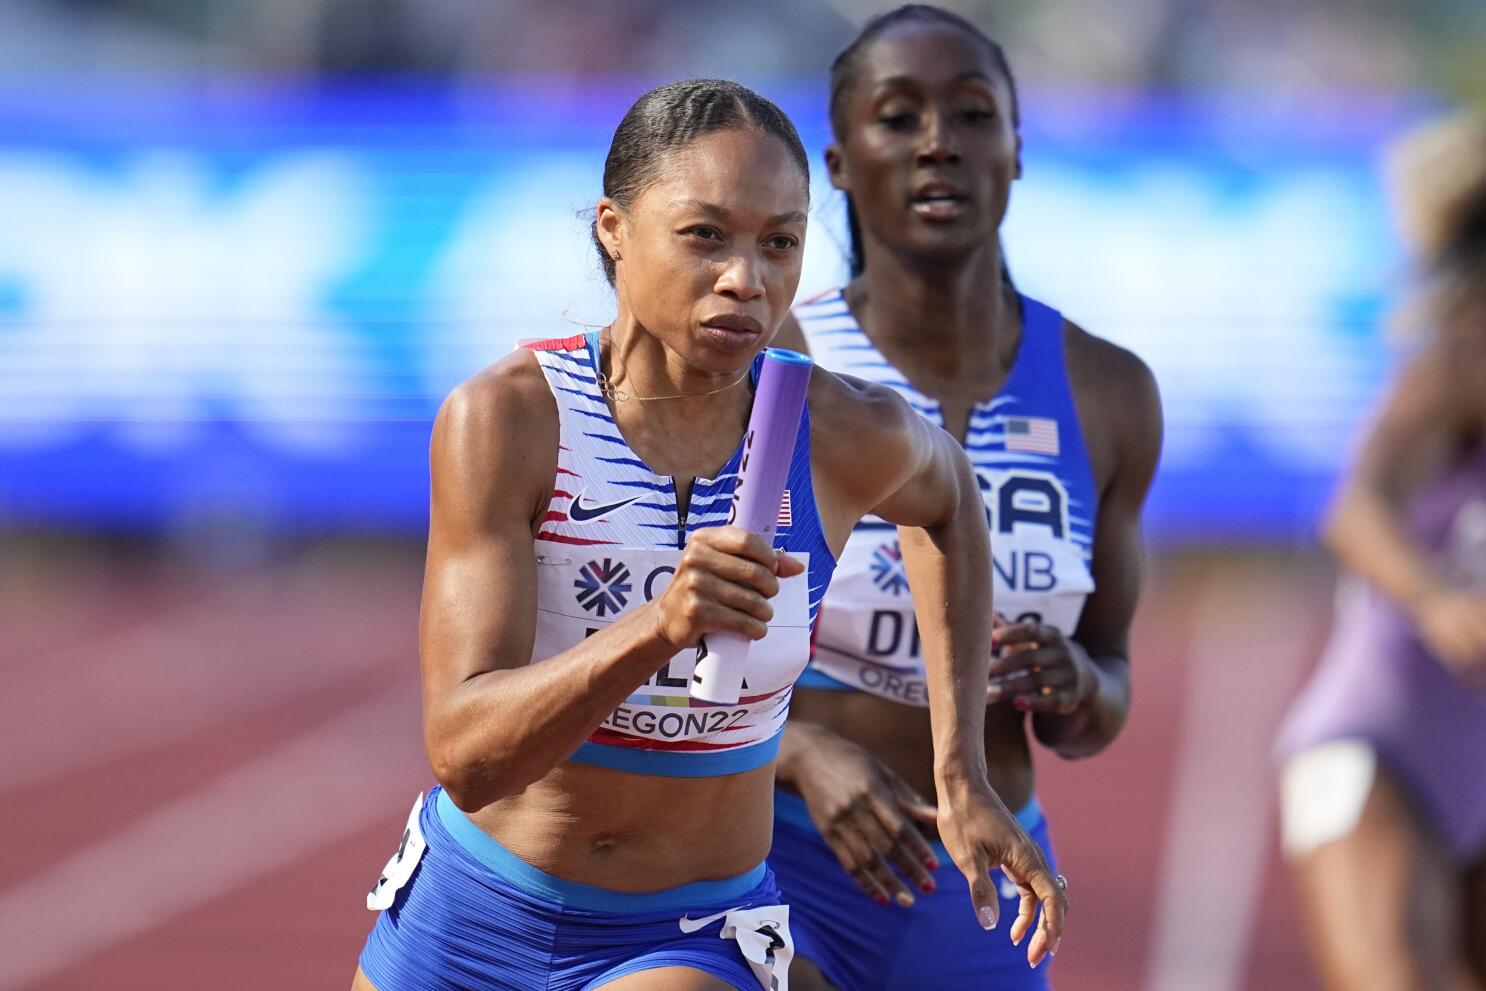 Allyson Felix Advances to the Semifinals in the 400 Meters. - The